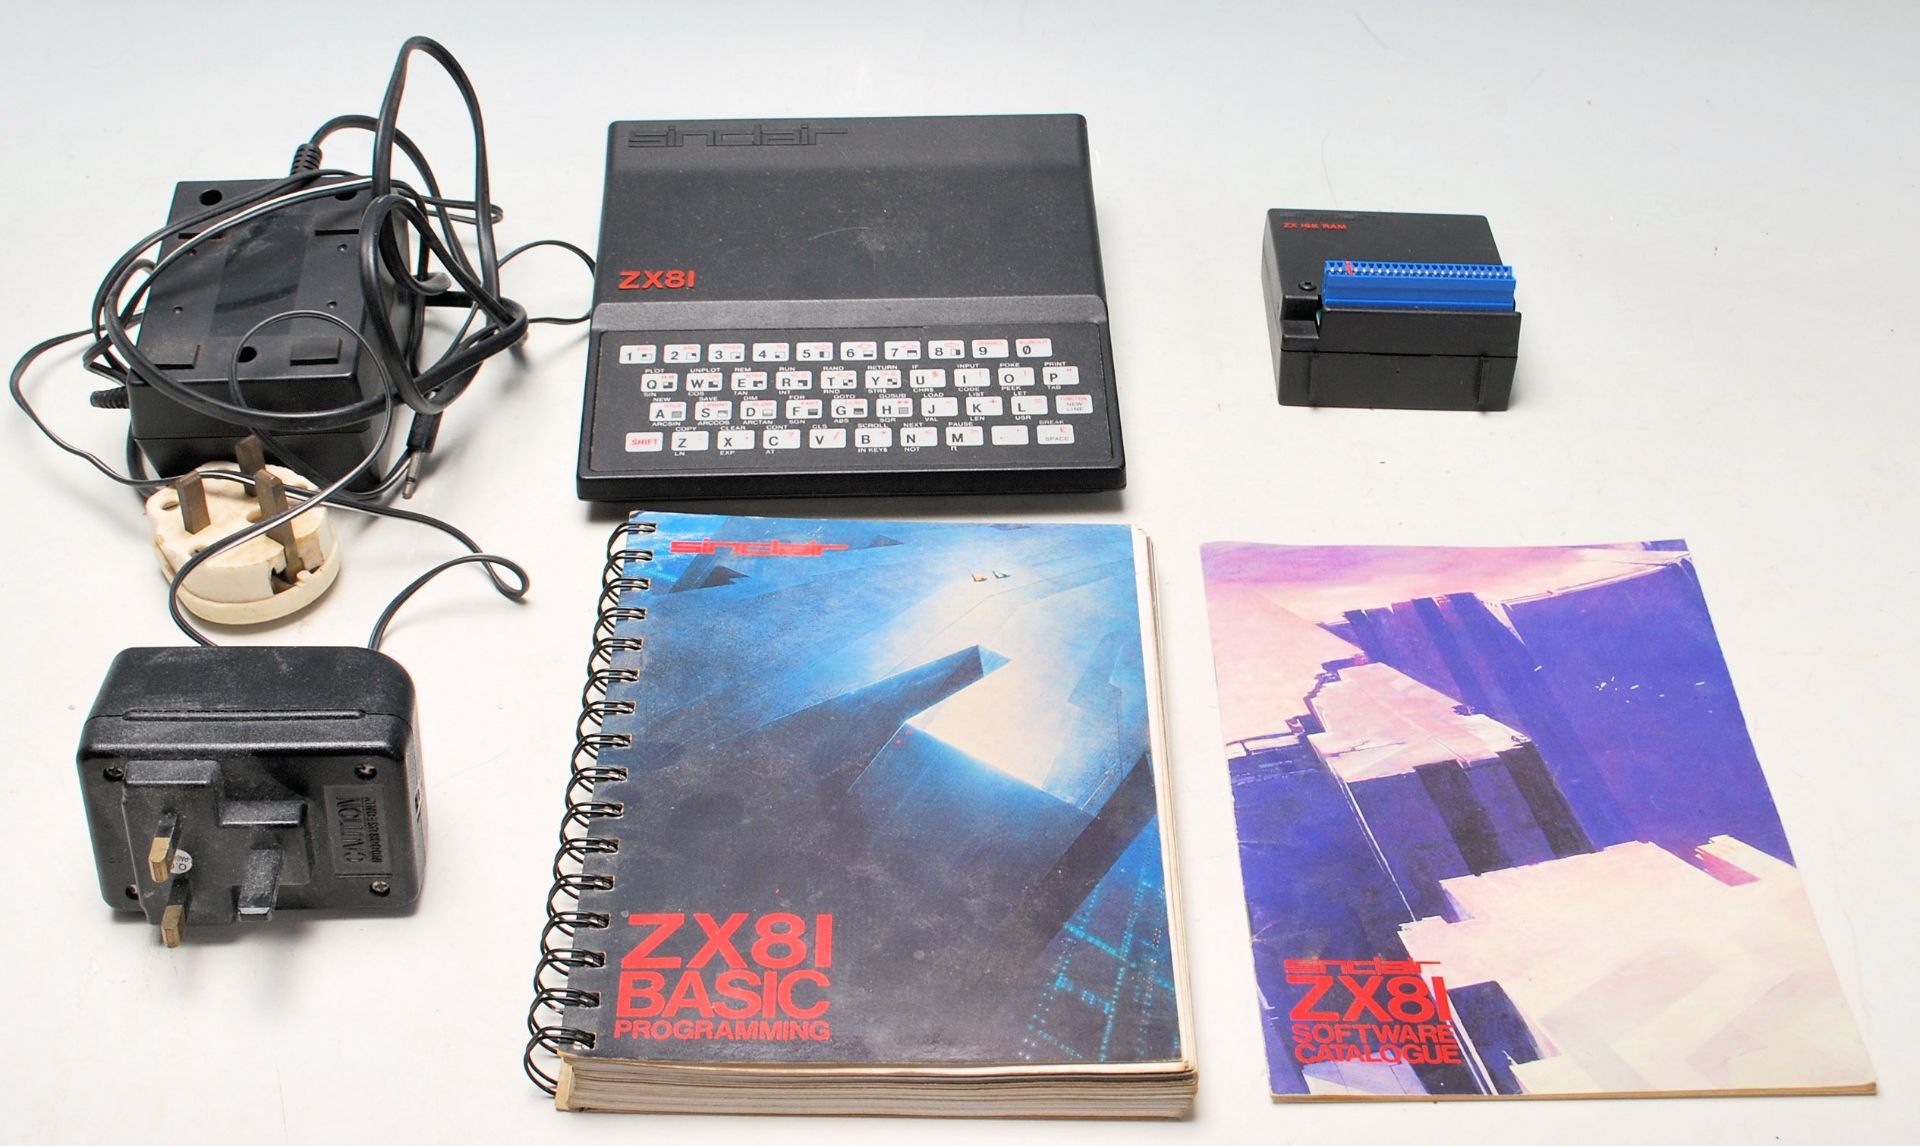 A retro vintage Sinclair ZX81 Computer, with a 16K RAM upgrade and power pack. Together with a